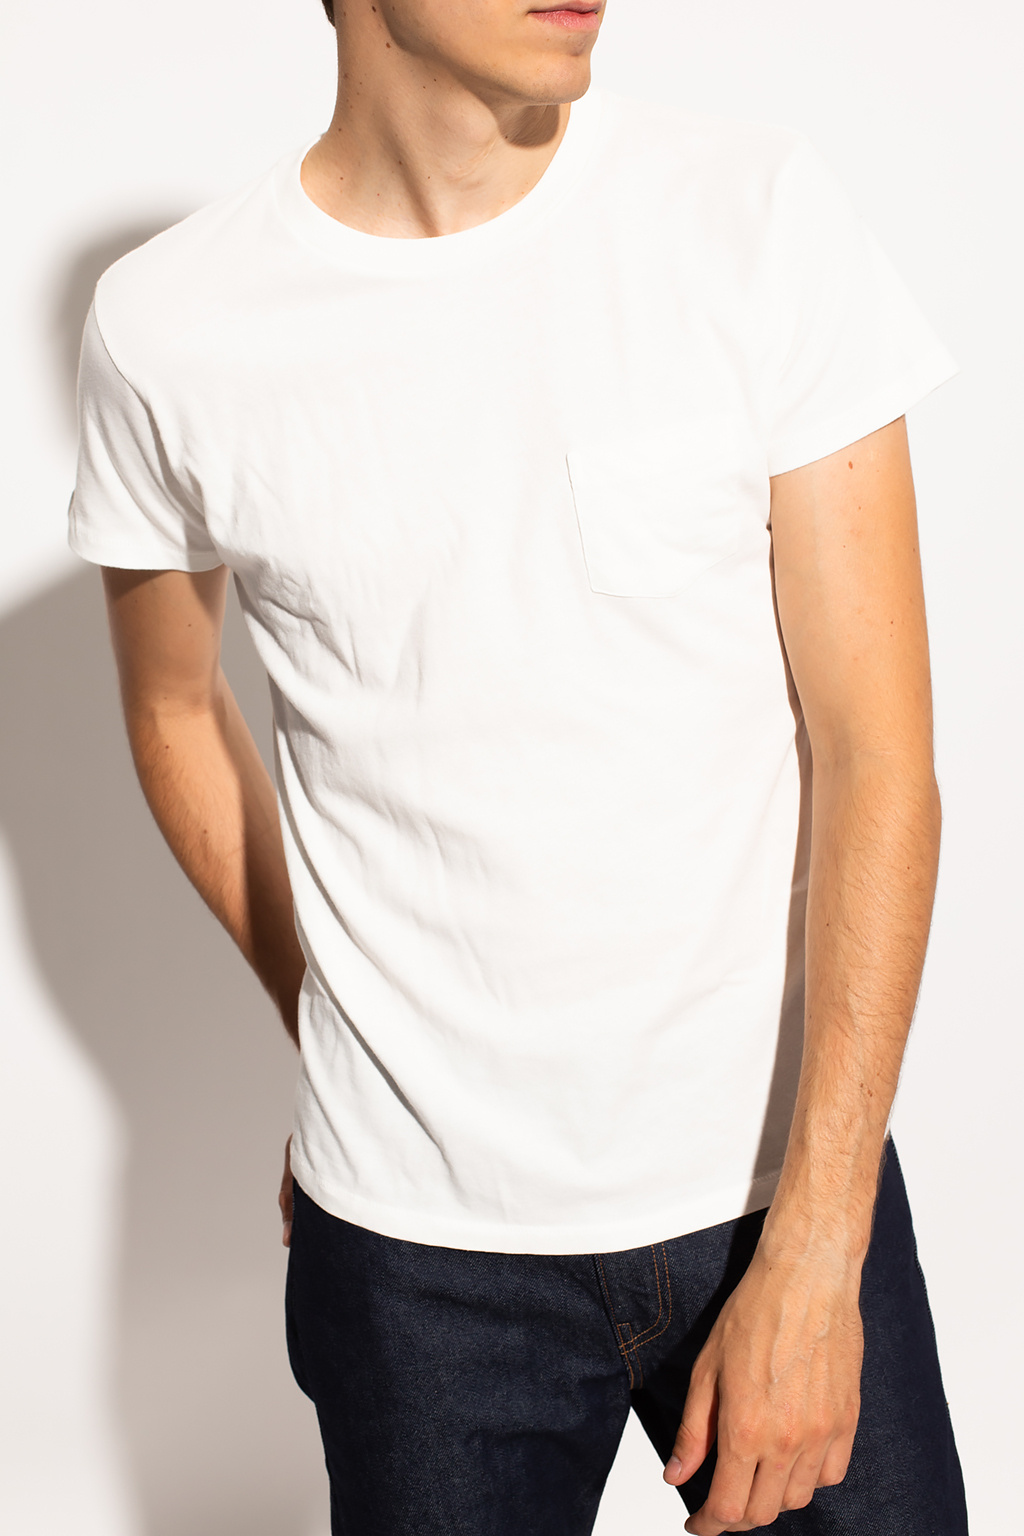 Levis T-shirt ‘Vintage Clothing’ collection